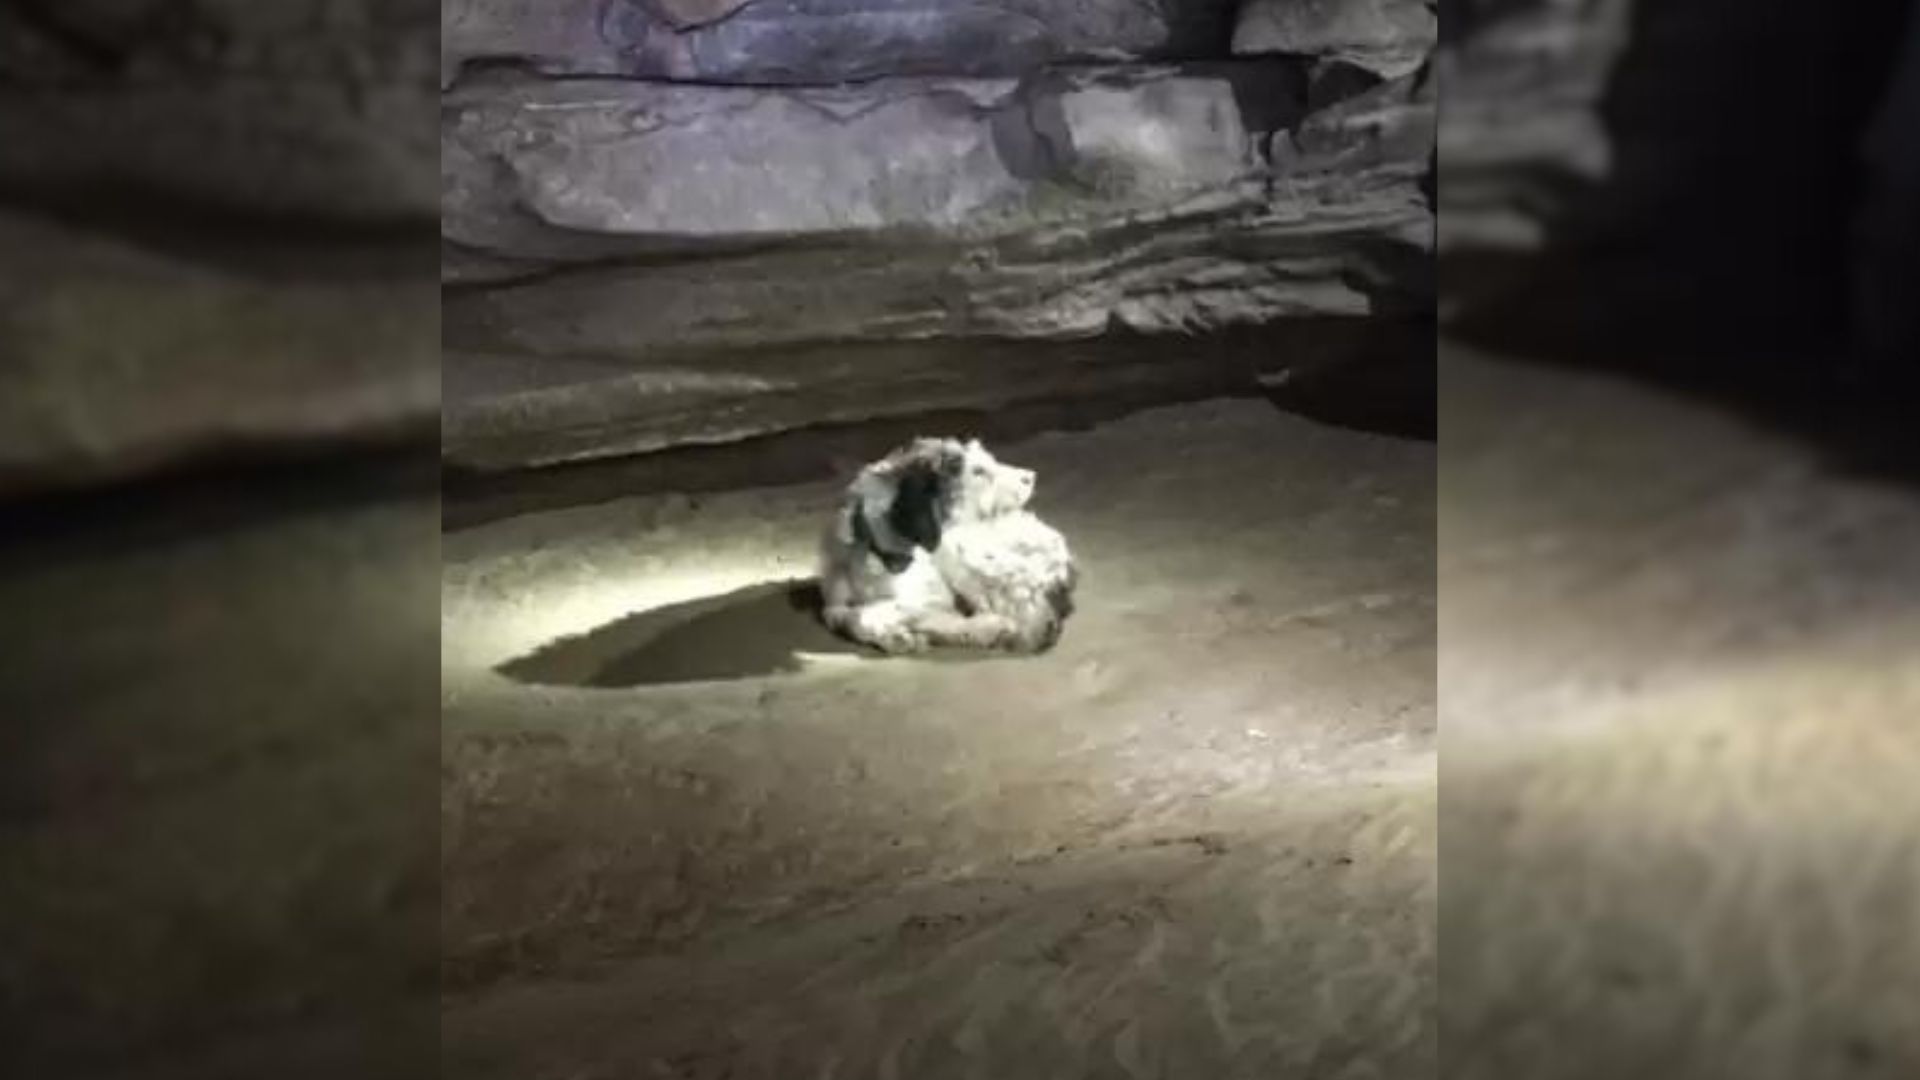 After Two Months Alone, Rescuers Find A Motionless Dog Lying In 12-Foot Pit